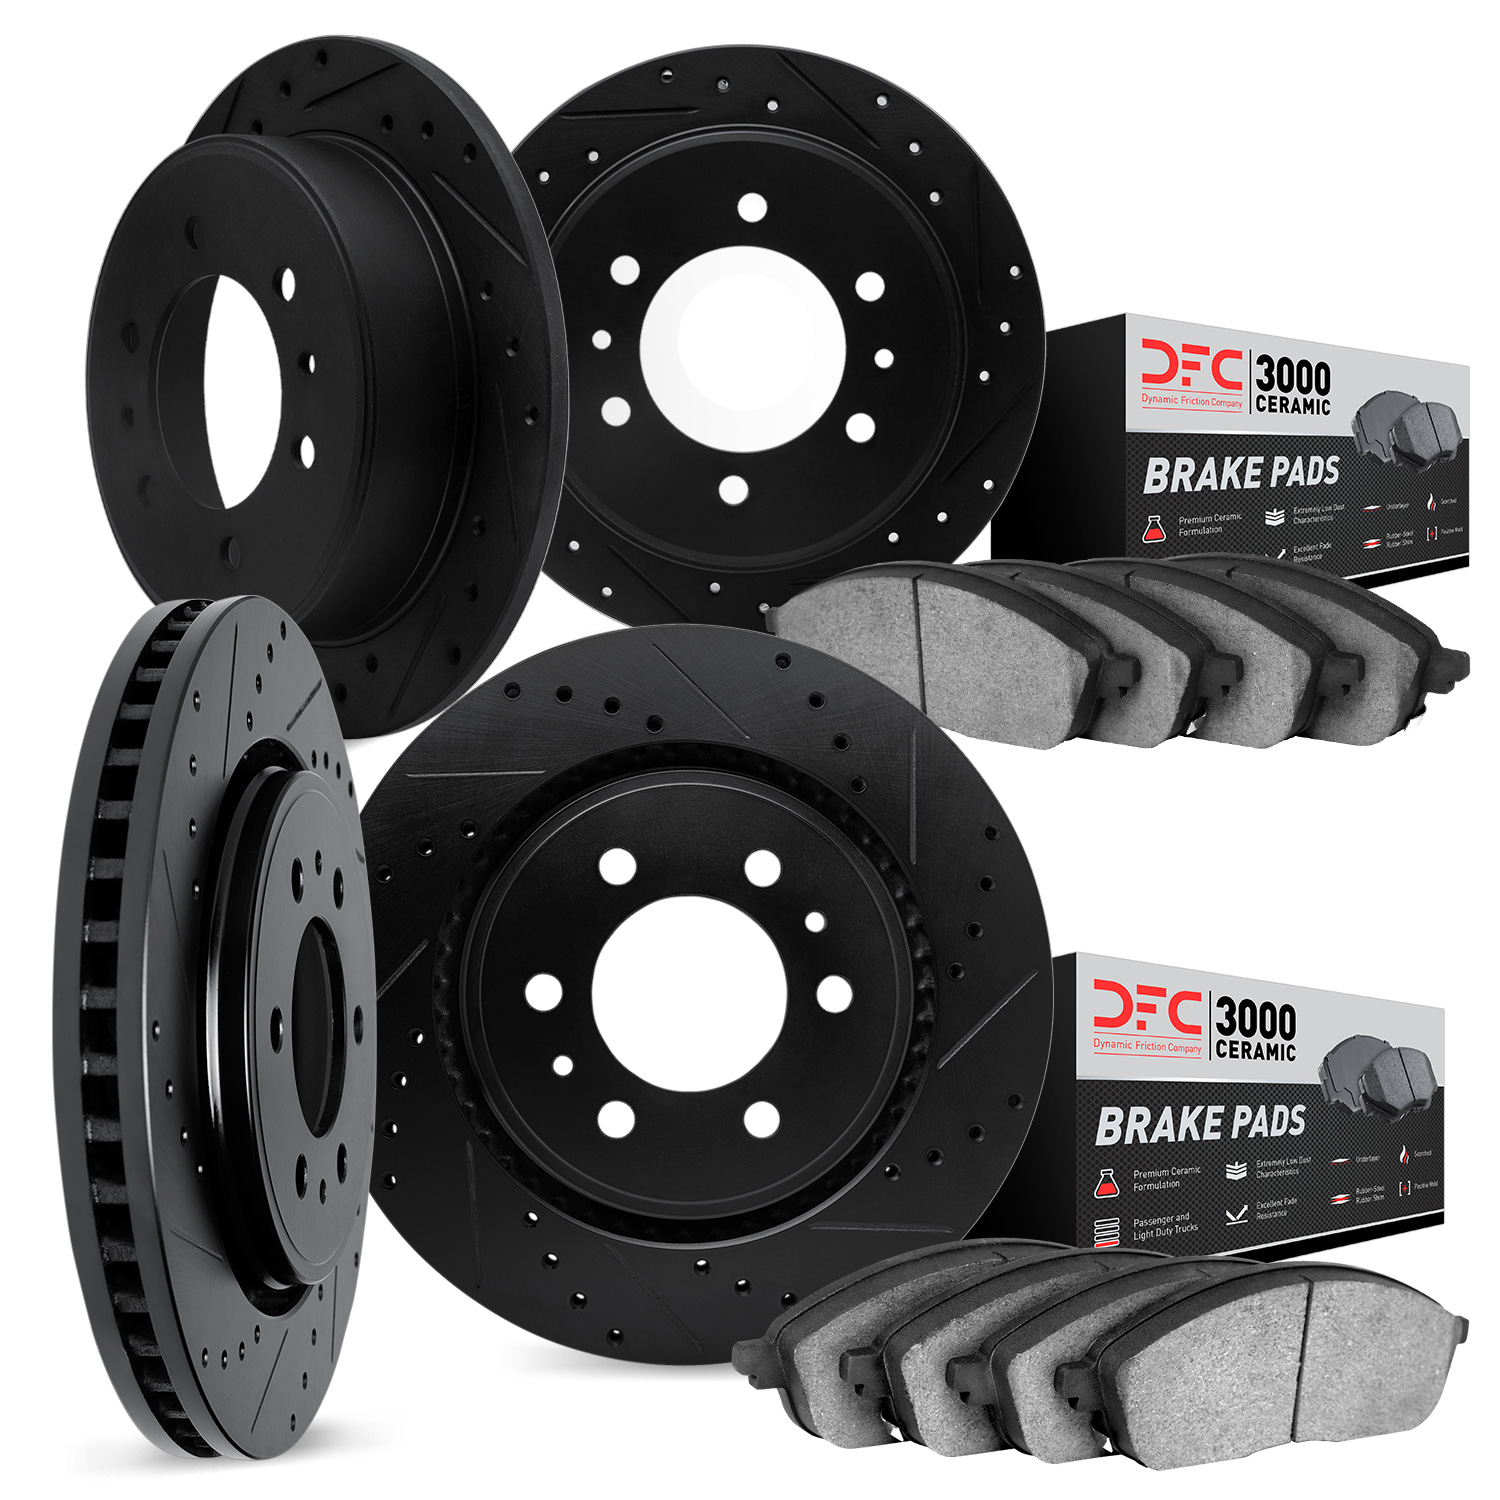 8304-72026 Drilled/Slotted Brake Rotors with 3000-Series Ceramic Brake Pads Kit [Black], 1994-2000 Mitsubishi, Position: Front a